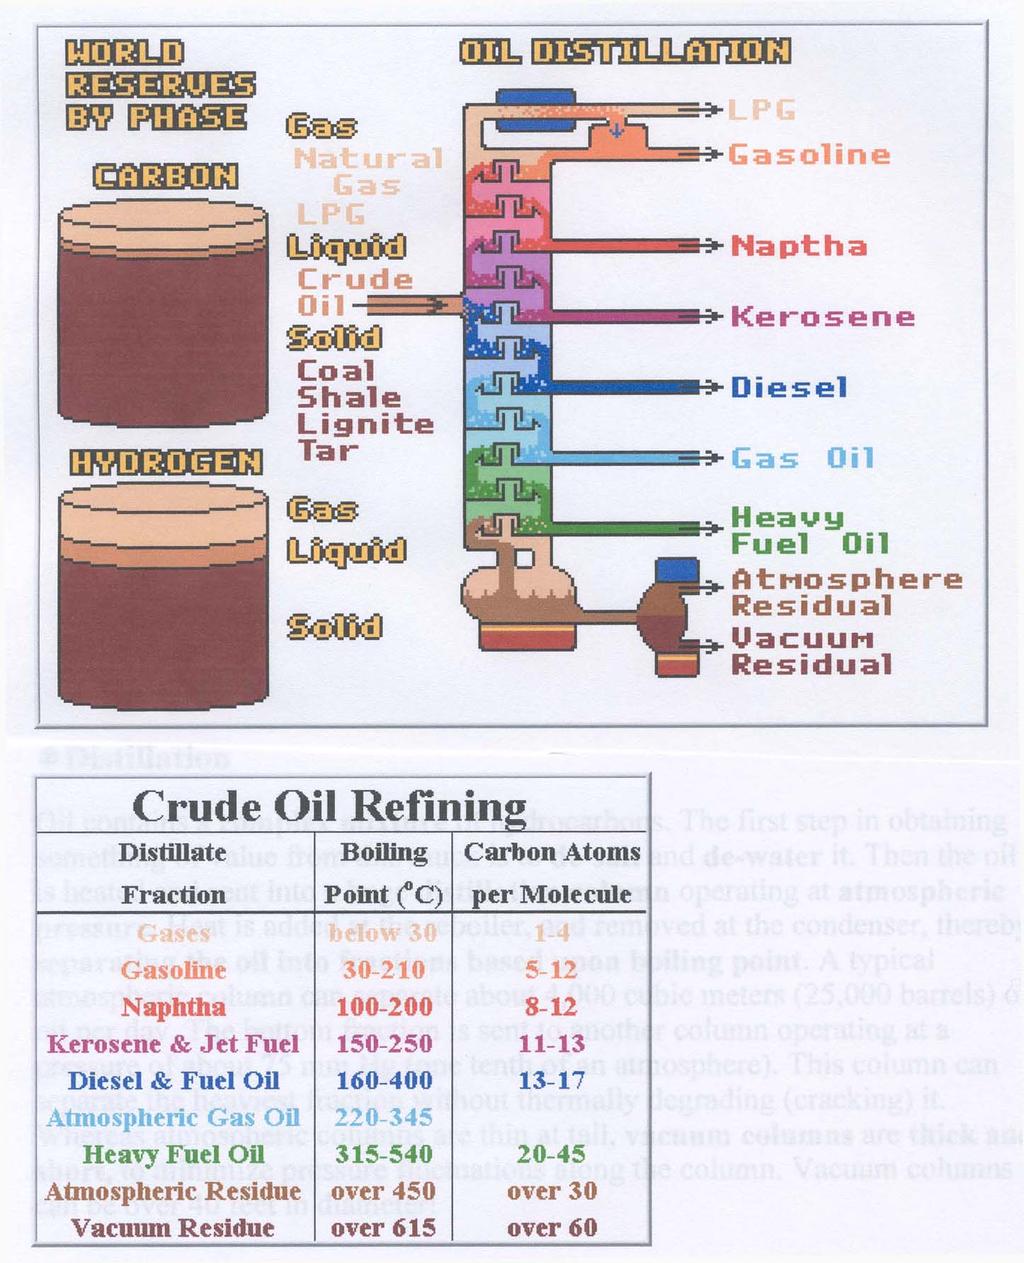 Diesel oil is in a group called middle distillates, because the boiling point is about in the middle between the light fractions and the heavy products. These range from Kerosene to heating oil.